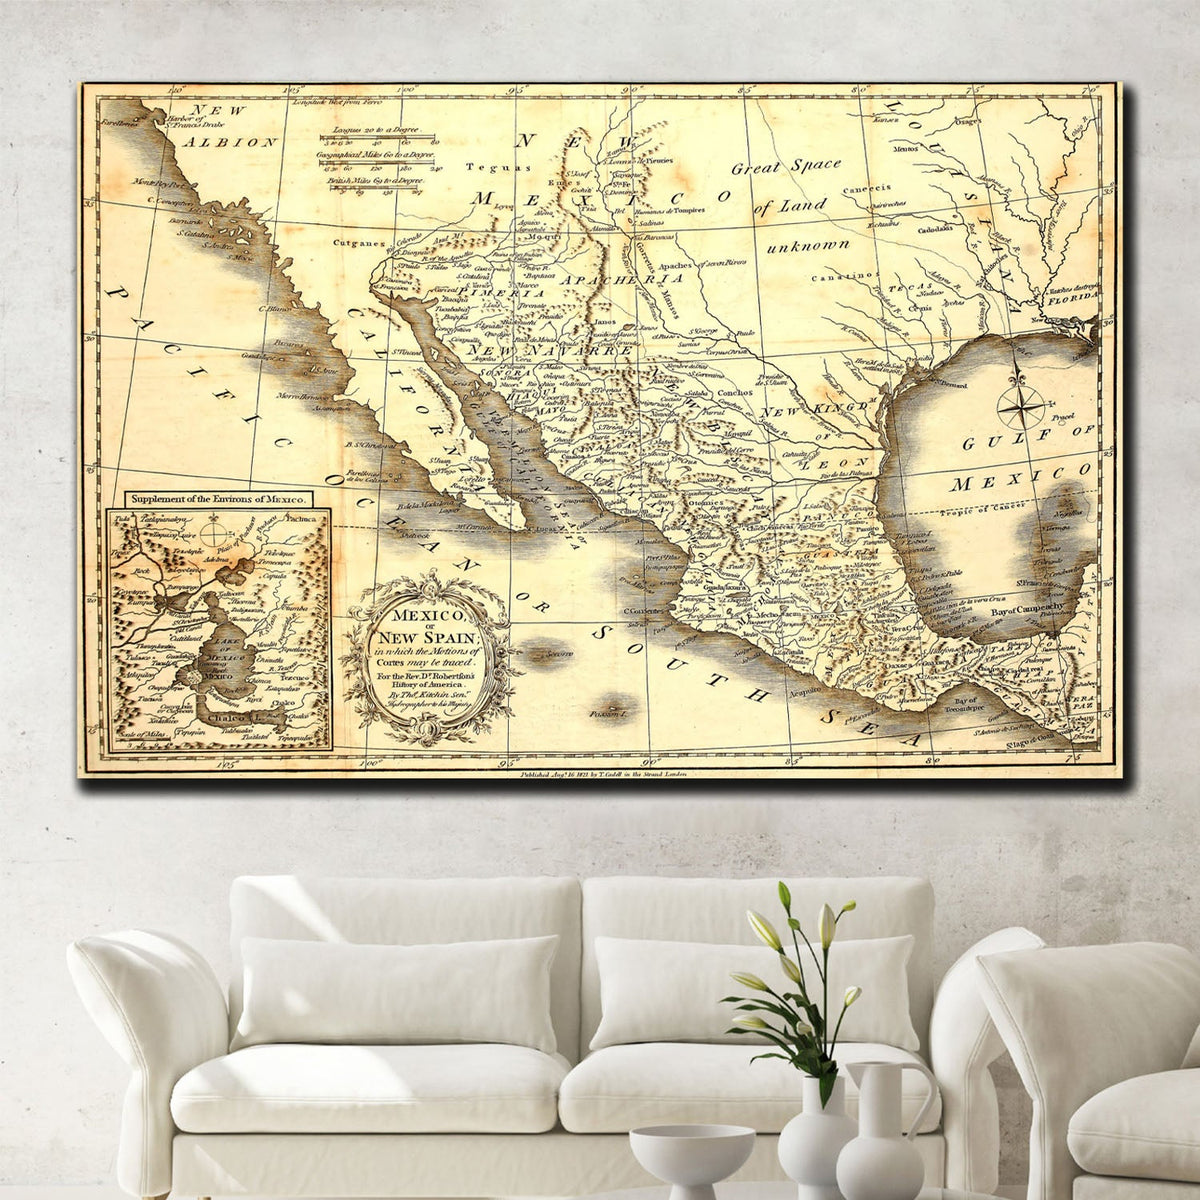 https://cdn.shopify.com/s/files/1/0387/9986/8044/products/OldMapofMexicoCanvasArtprintStretched-4.jpg